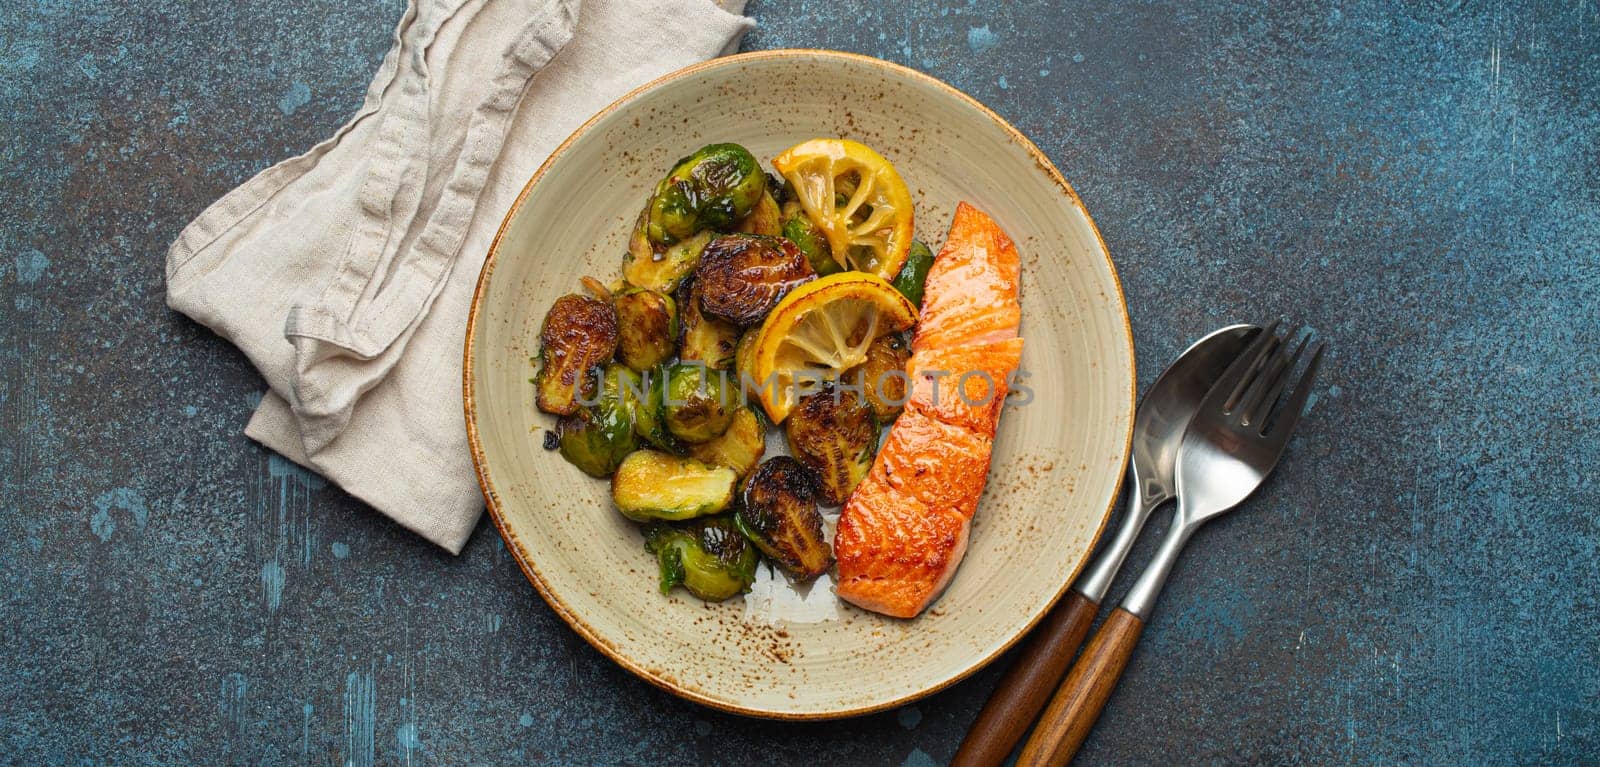 Delicious salmon fillet with grilled Brussels sprouts on plate, rustic concrete background top view. Healthy dinner with grilled fish and vegetables, balanced nutrition by its_al_dente